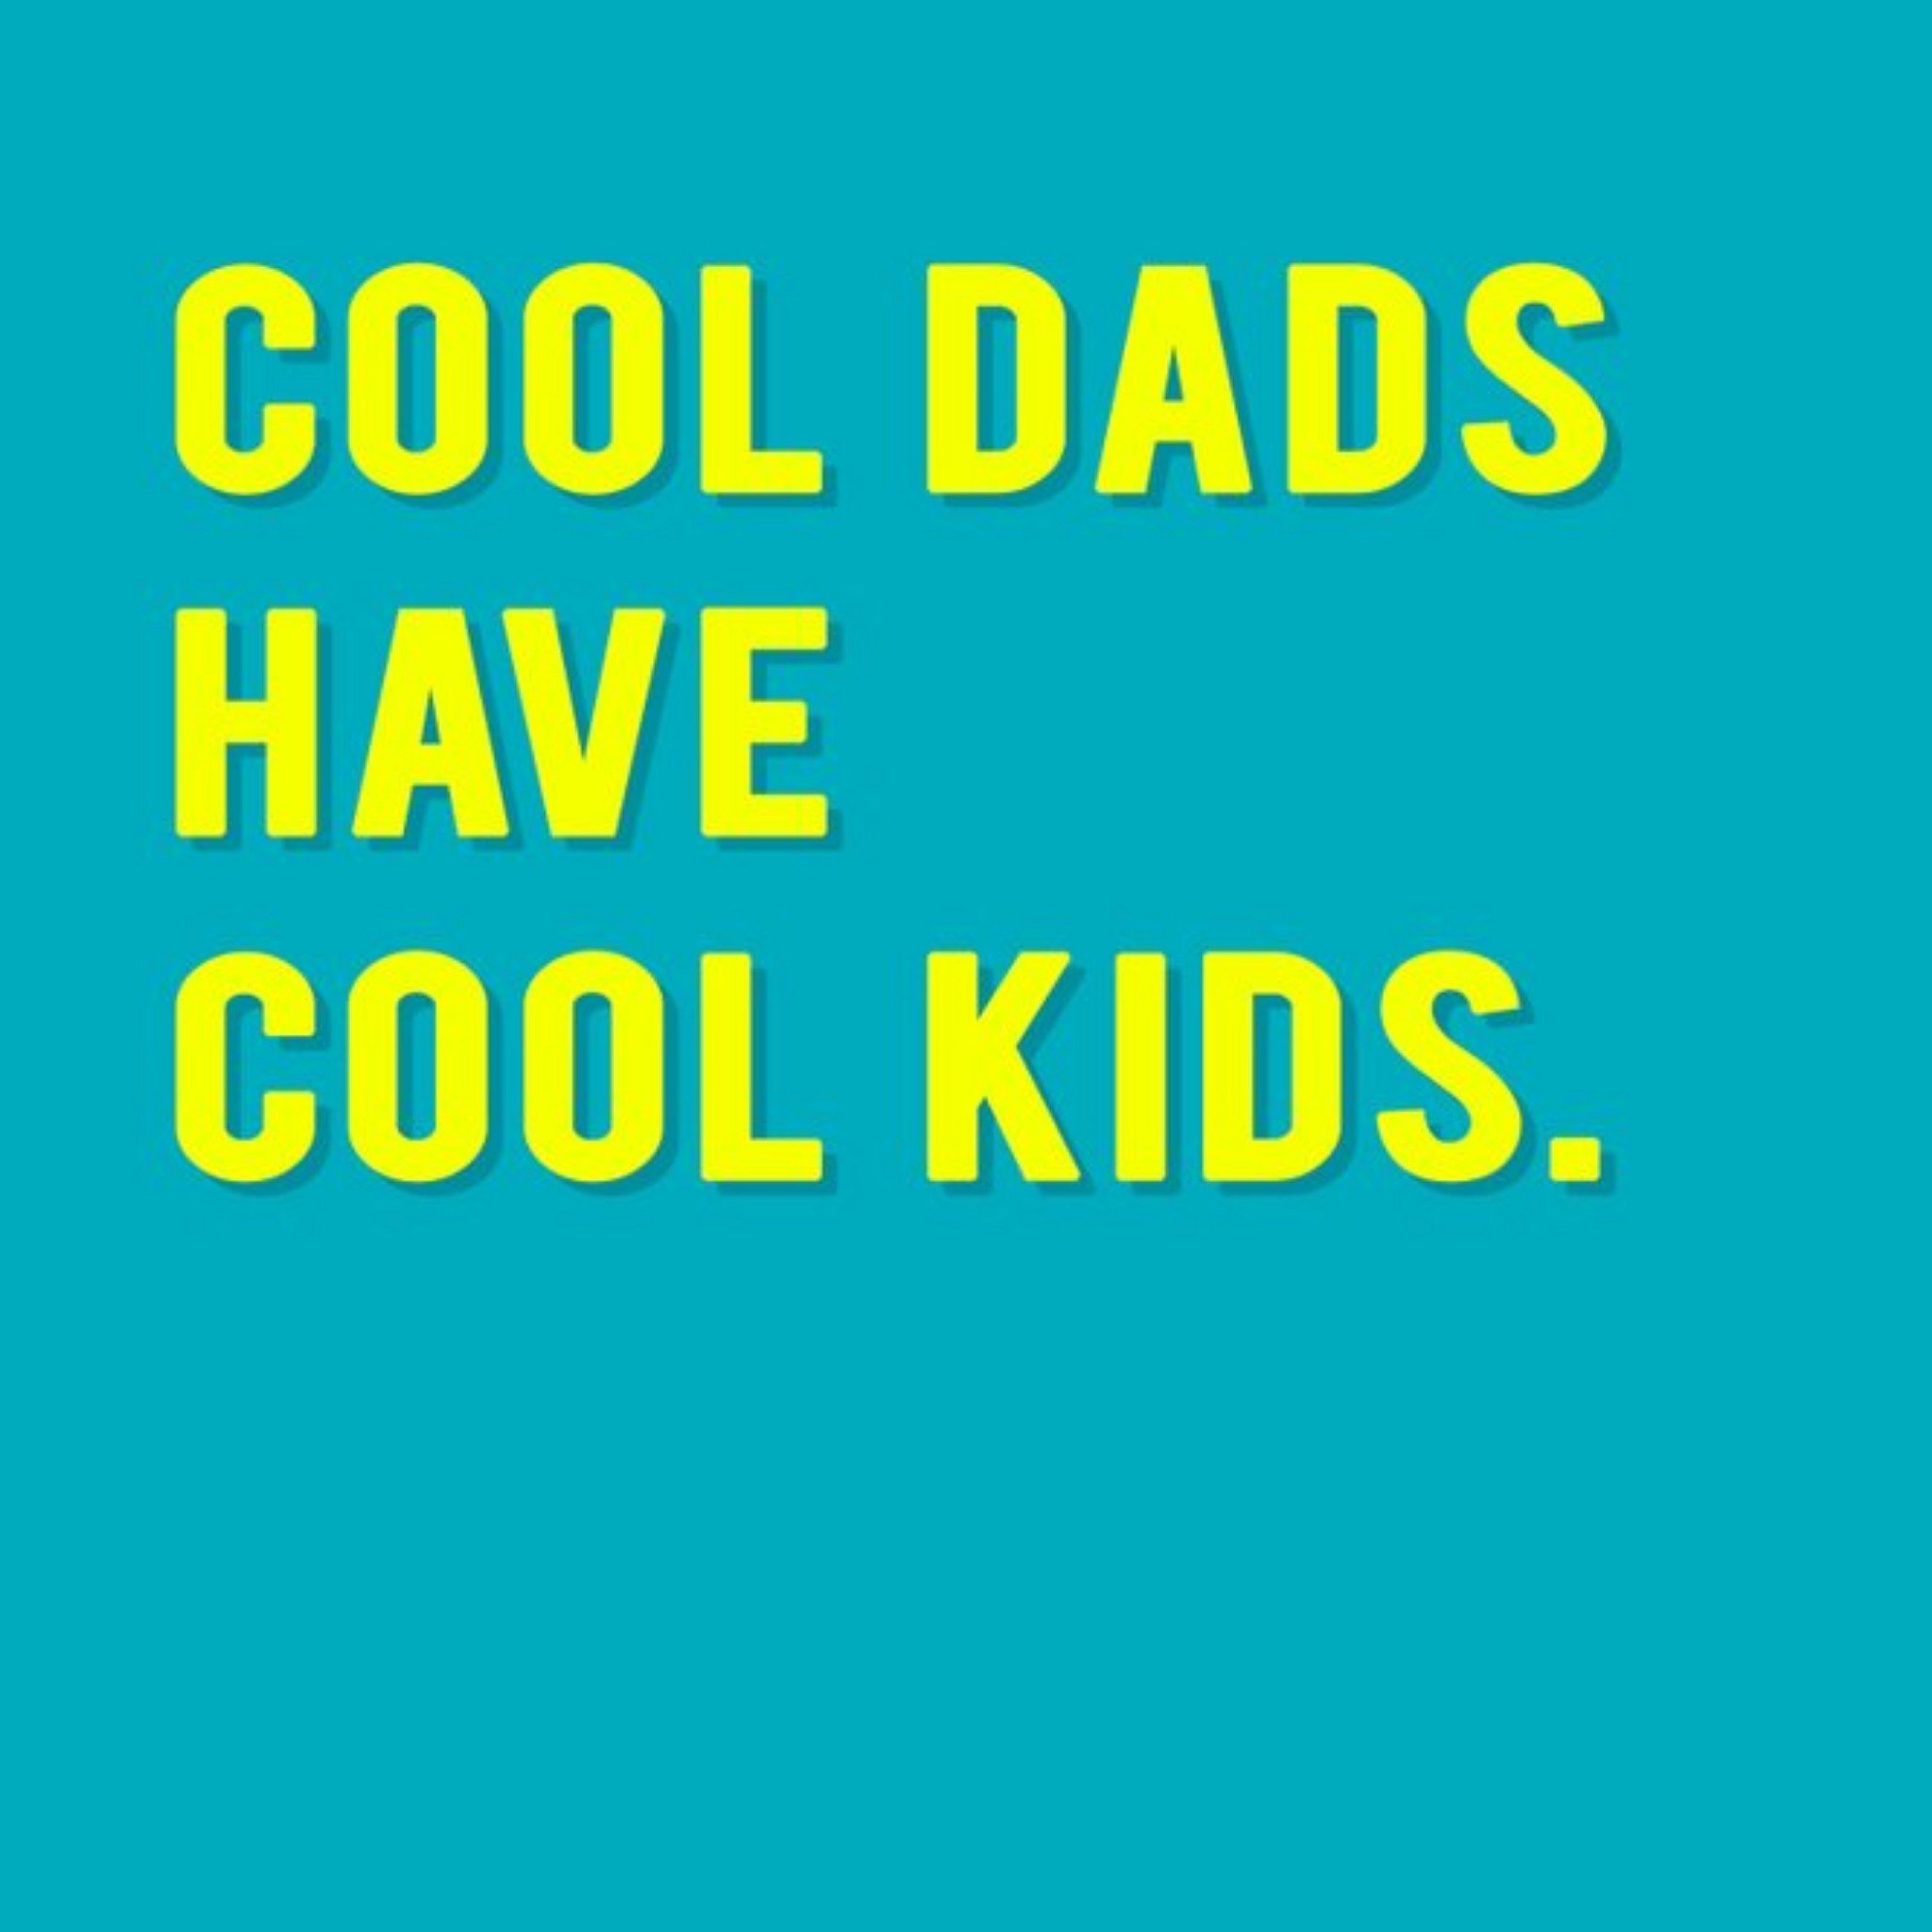 Moonpig Modern Typographical Cool Dads Have Cool Kids Card, Square